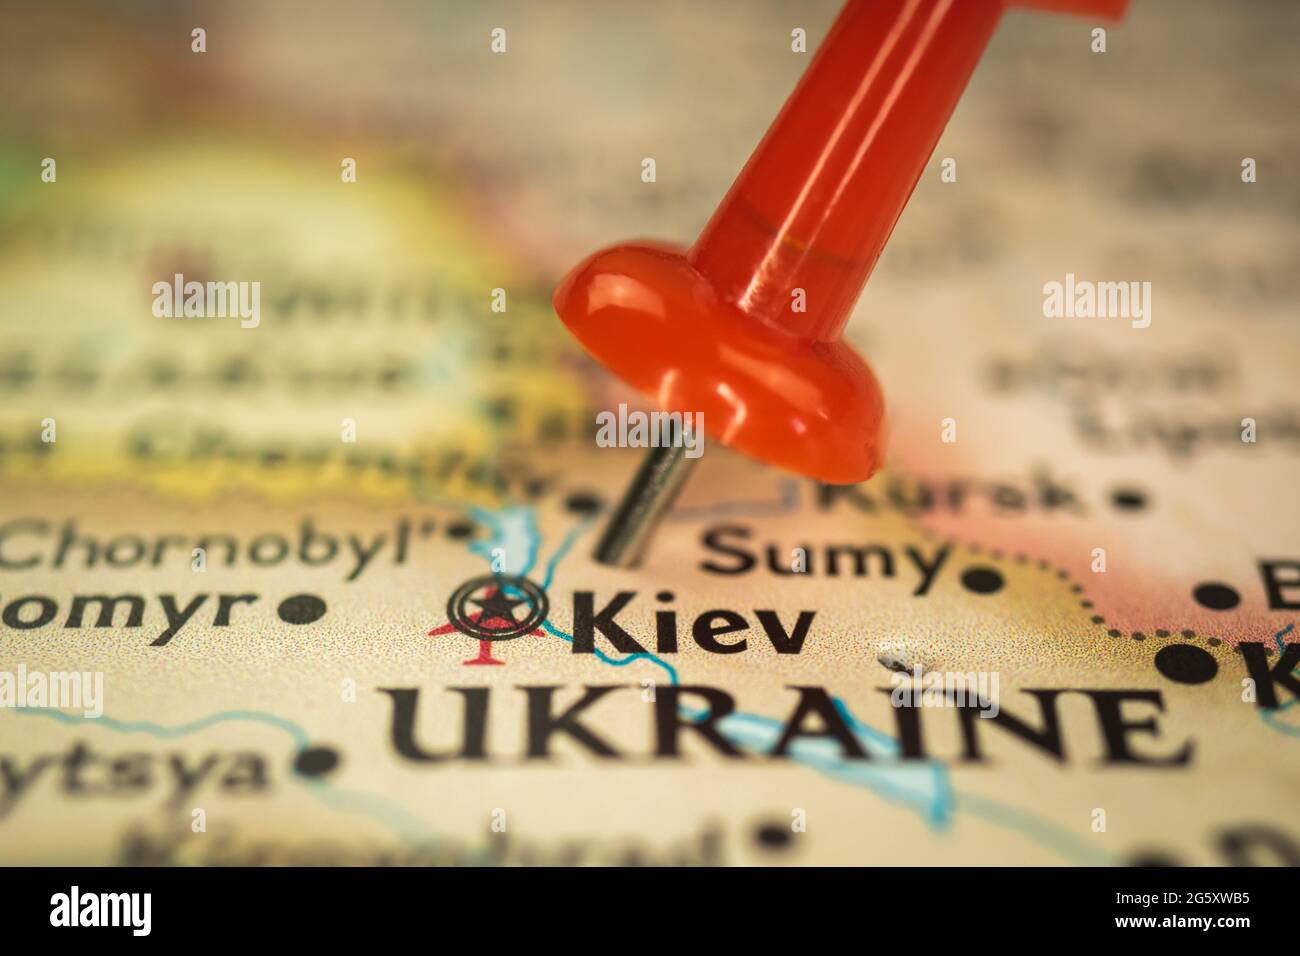 Location Kiev in Ukraine, push pin on map closeup, marker of destination for travel, tourism and trip concept, Europe Stock Photo